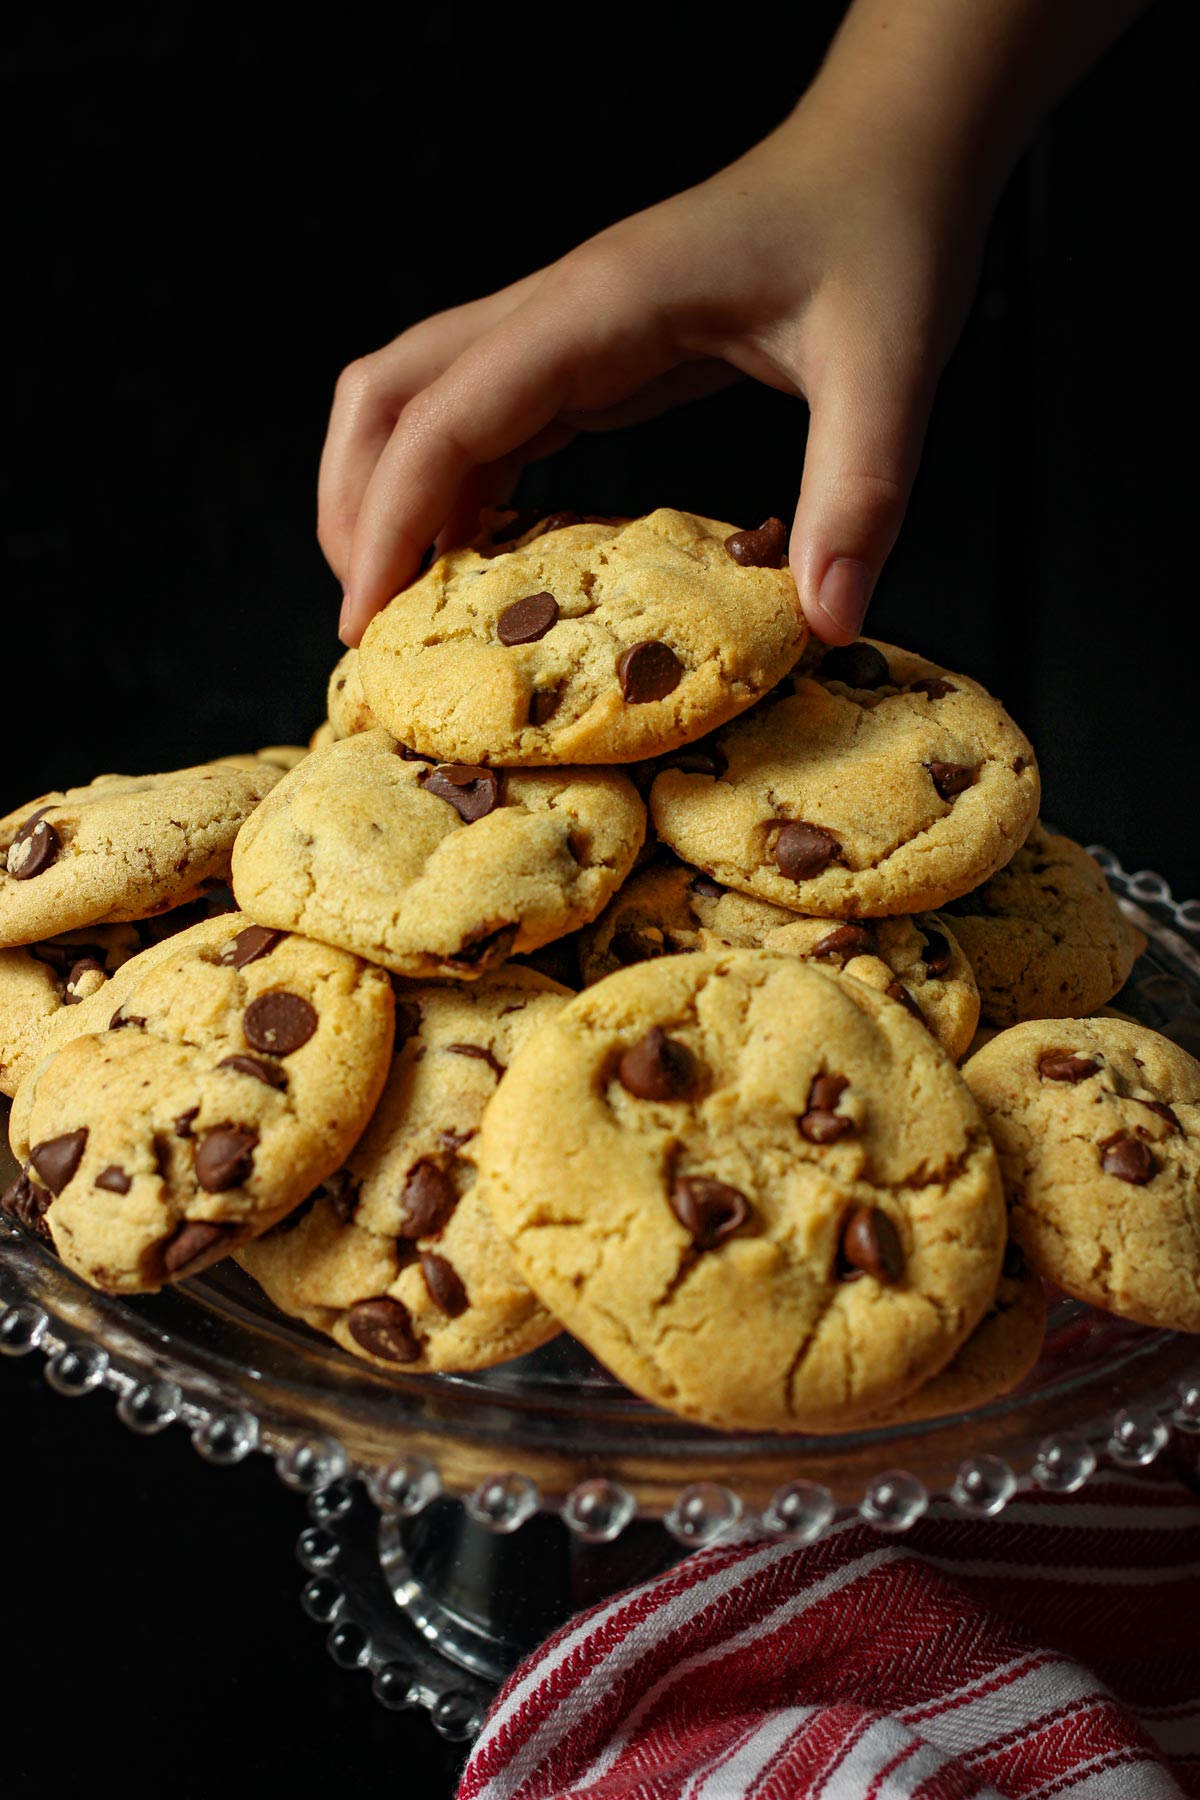 girl's hand reaching for a chocolate chip cookie from a stack on a platter.